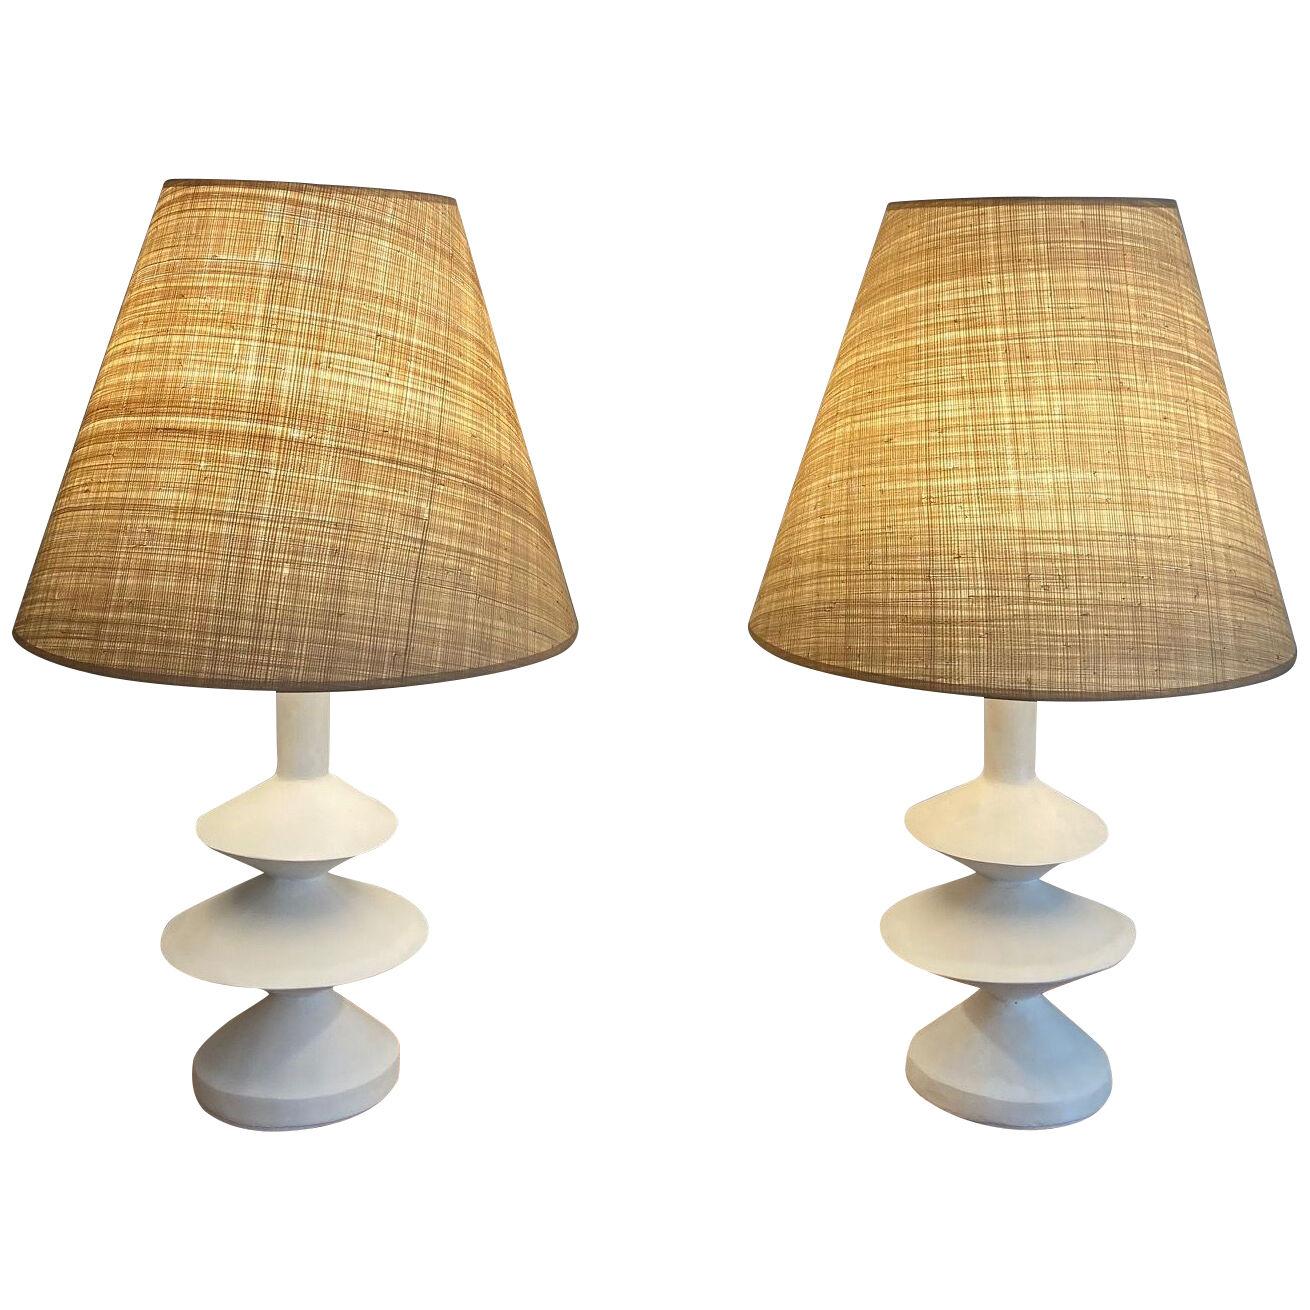 Pair of plaster lamps with raffia shades "Palma" 